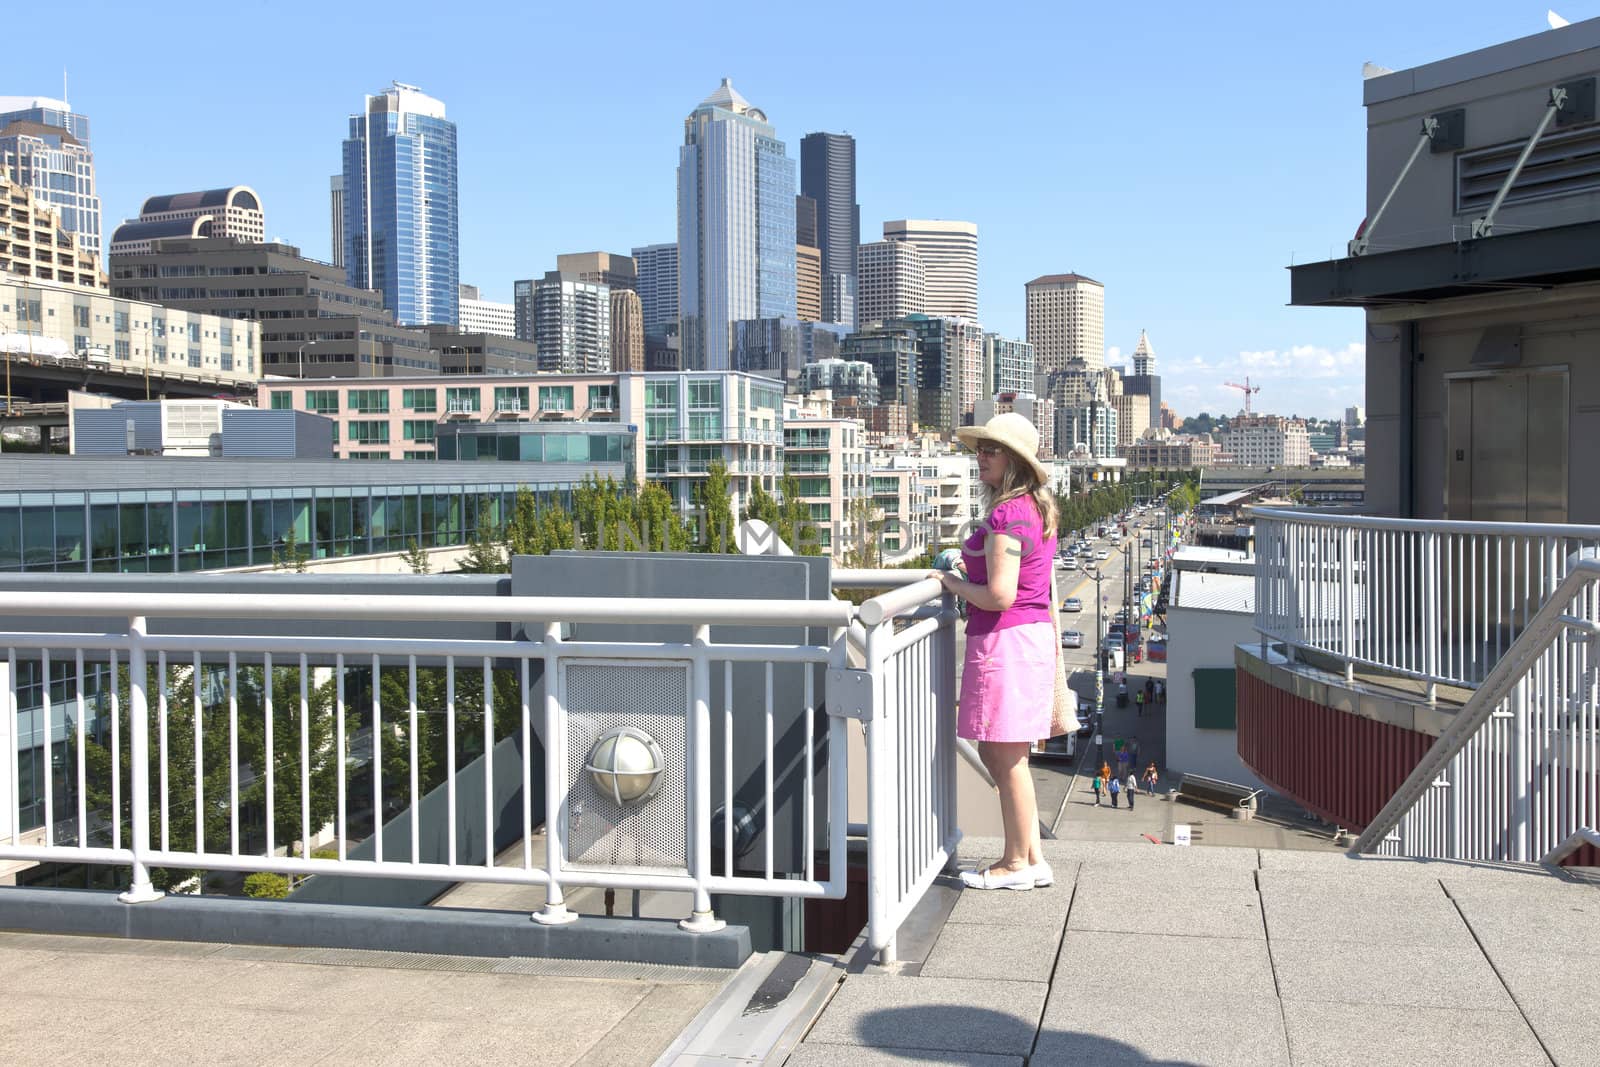 Visiting Seattle, pier 66 overpass and promenade.